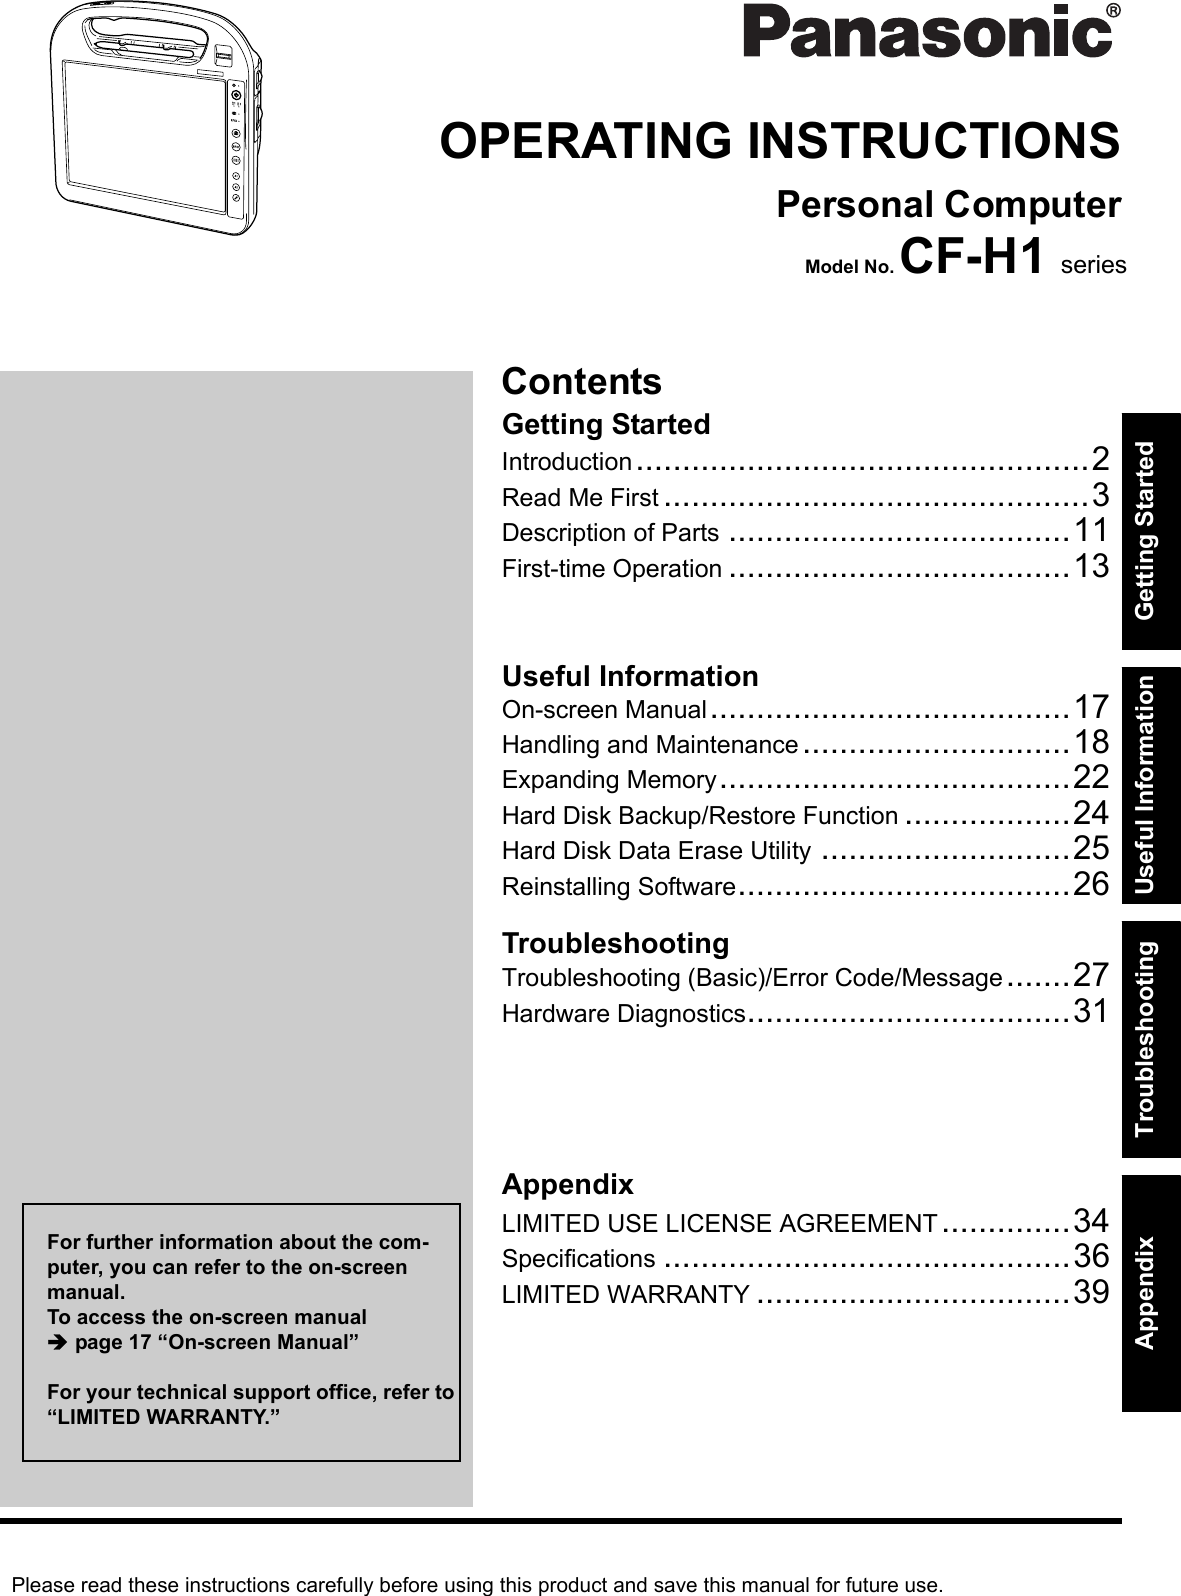 Please read these instructions carefully before using this product and save this manual for future use.ContentsGetting StartedUseful InformationTroubleshootingGetting StartedUseful InformationTroubleshootingAppendixAppendixOPERATING INSTRUCTIONSPersonal ComputerModel No. CF-H1 seriesIntroduction.................................................2Read Me First ..............................................3Description of Parts .....................................11First-time Operation .....................................13On-screen Manual.......................................17Handling and Maintenance .............................18Expanding Memory......................................22Hard Disk Backup/Restore Function ..................24Hard Disk Data Erase Utility ...........................25Reinstalling Software....................................26Troubleshooting (Basic)/Error Code/Message.......27Hardware Diagnostics...................................31LIMITED USE LICENSE AGREEMENT..............34Specifications ............................................36LIMITED WARRANTY ..................................39For further information about the com-puter, you can refer to the on-screen manual.To access the on-screen manual page 17 “On-screen Manual”For your technical support office, refer to “LIMITED WARRANTY.”